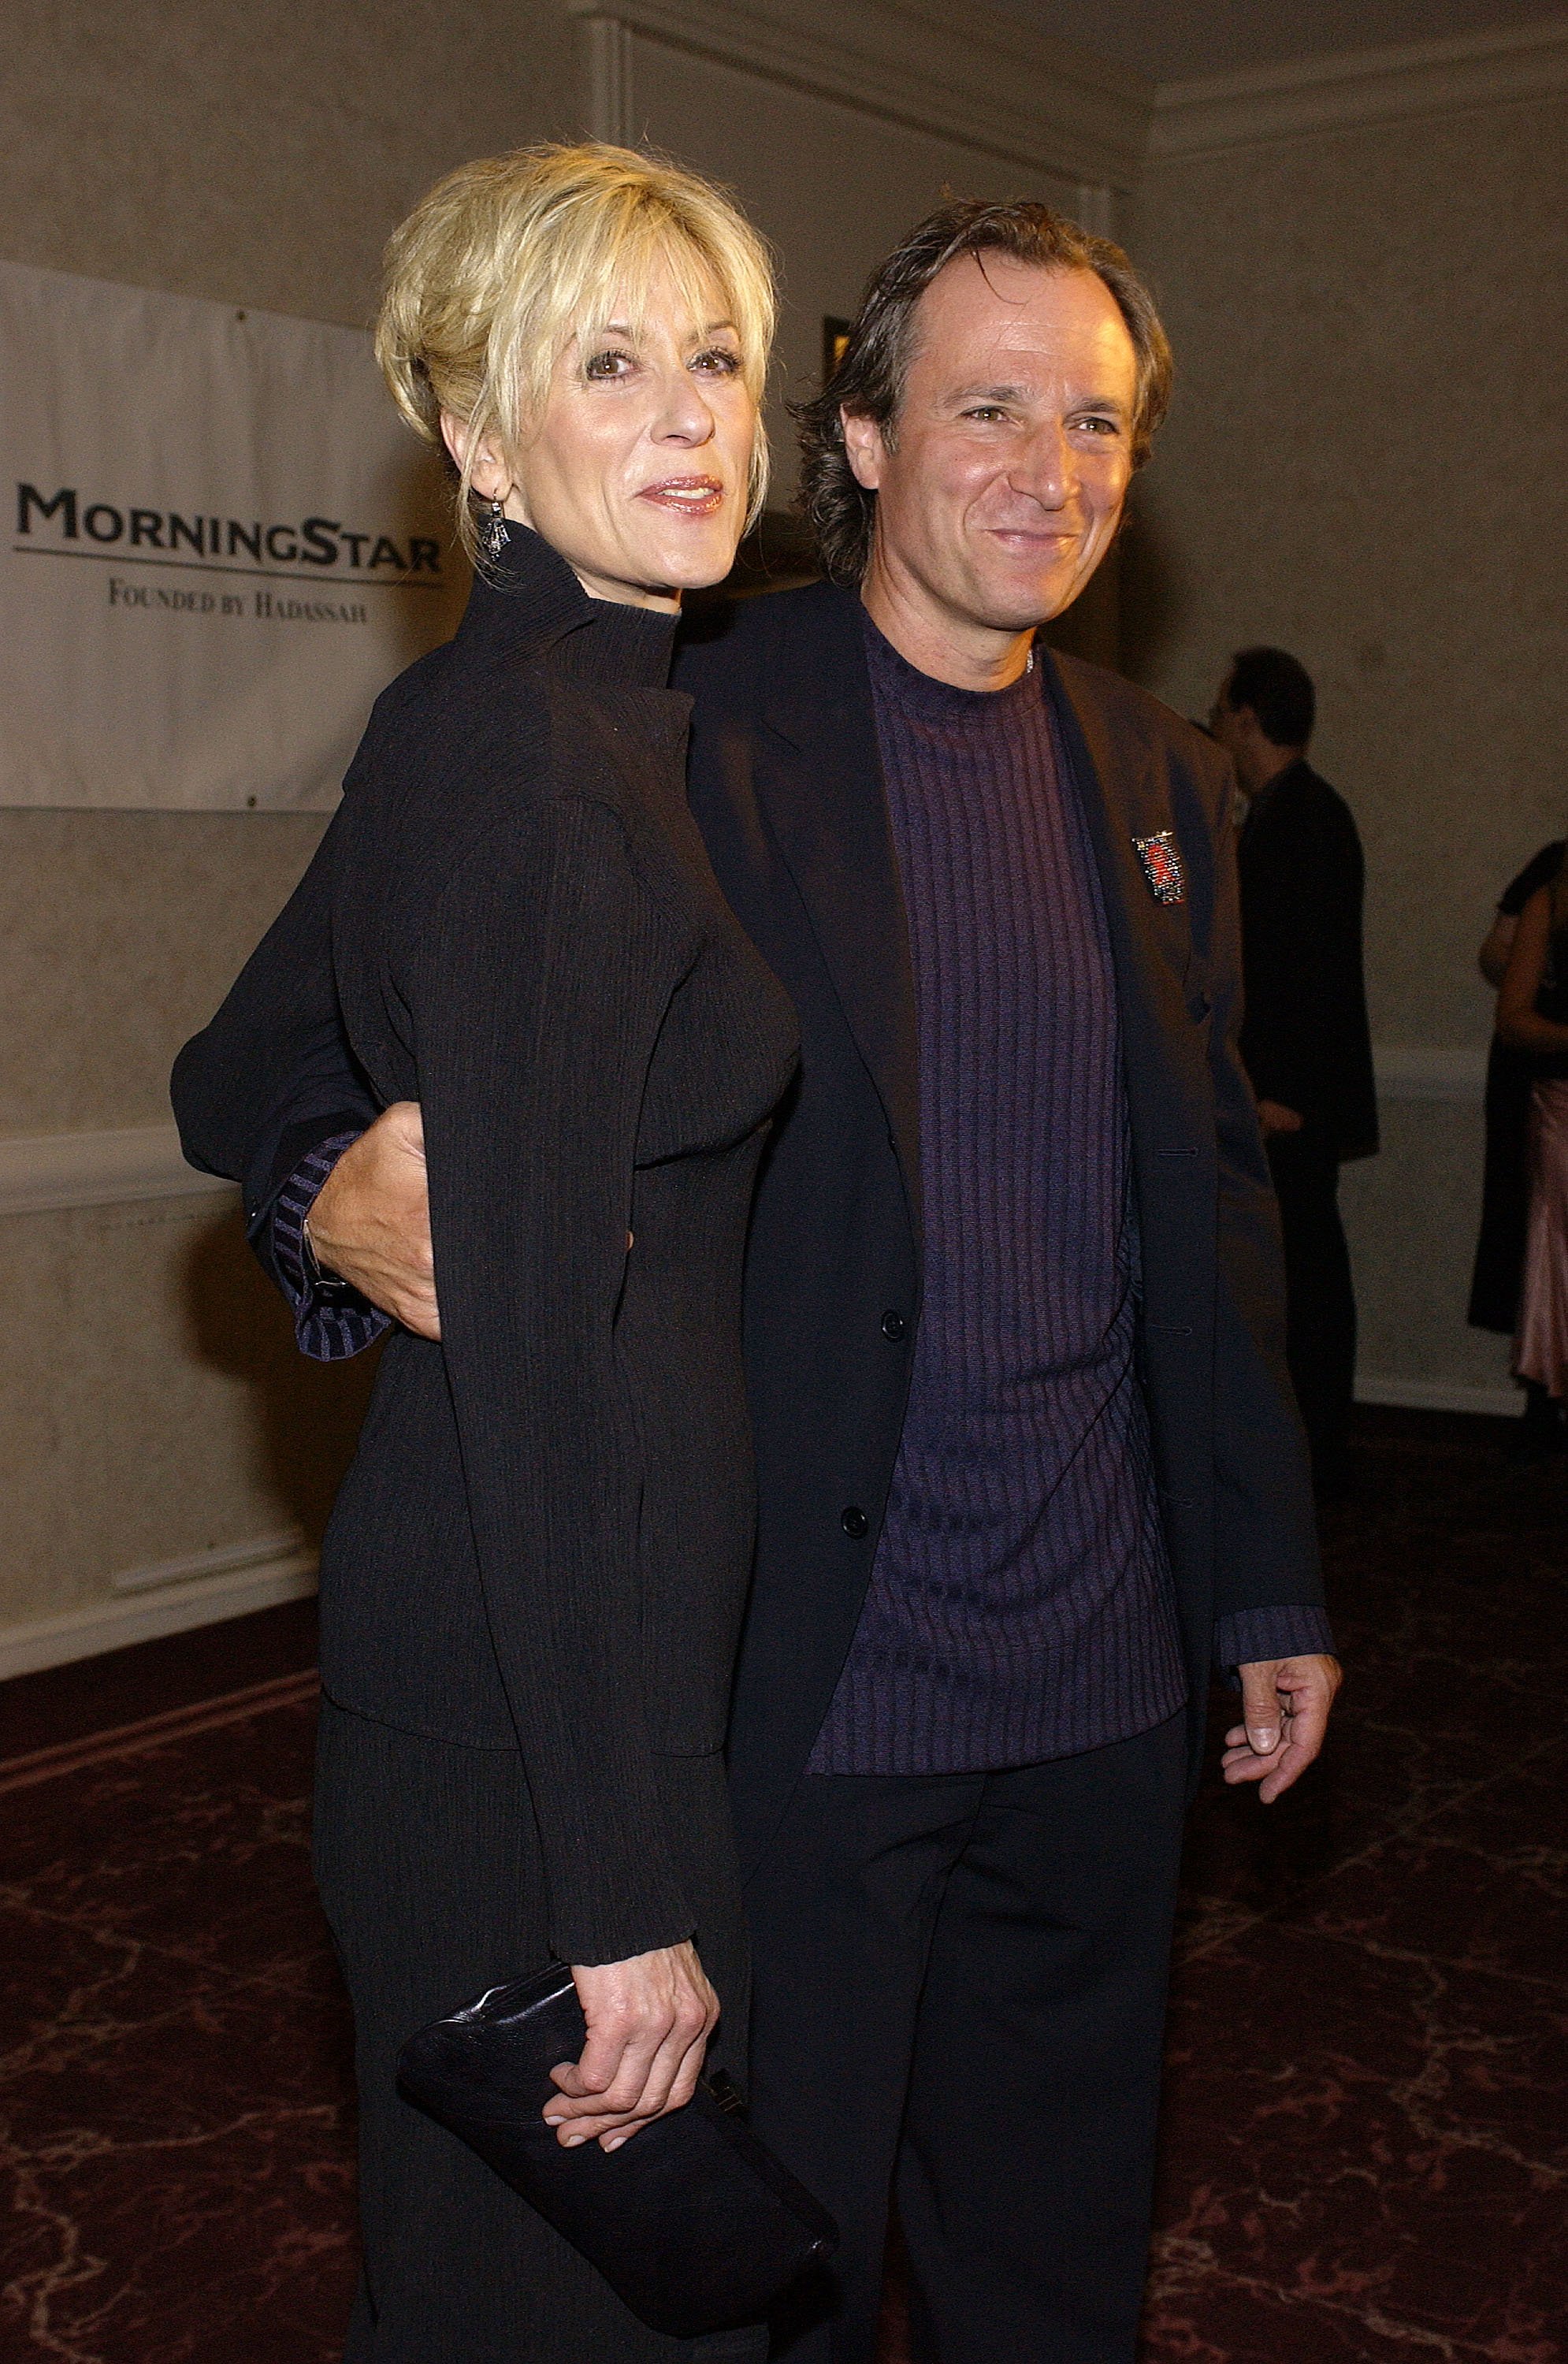 Judith Light and husband Robert Desiderio attend the 3rd Annual Jewish Image Awards in Film and Television on September 22, 2003, at the Beverly Hilton Hotel in Beverly Hills, California. | Source: Getty Images.